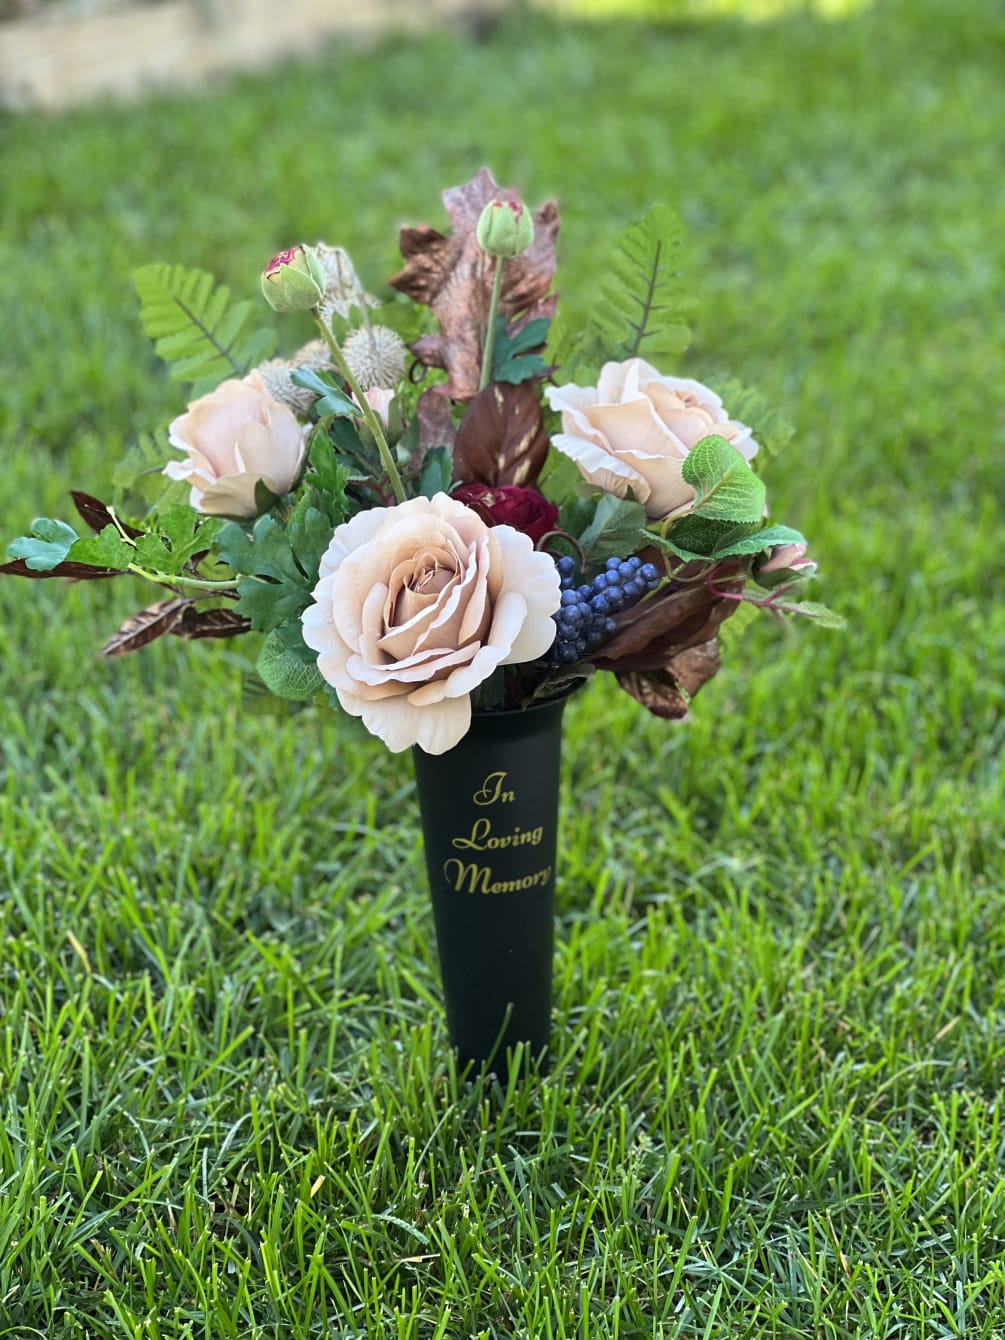 Our Summer Rose cemetery vase is filled with wonderful blend of silk